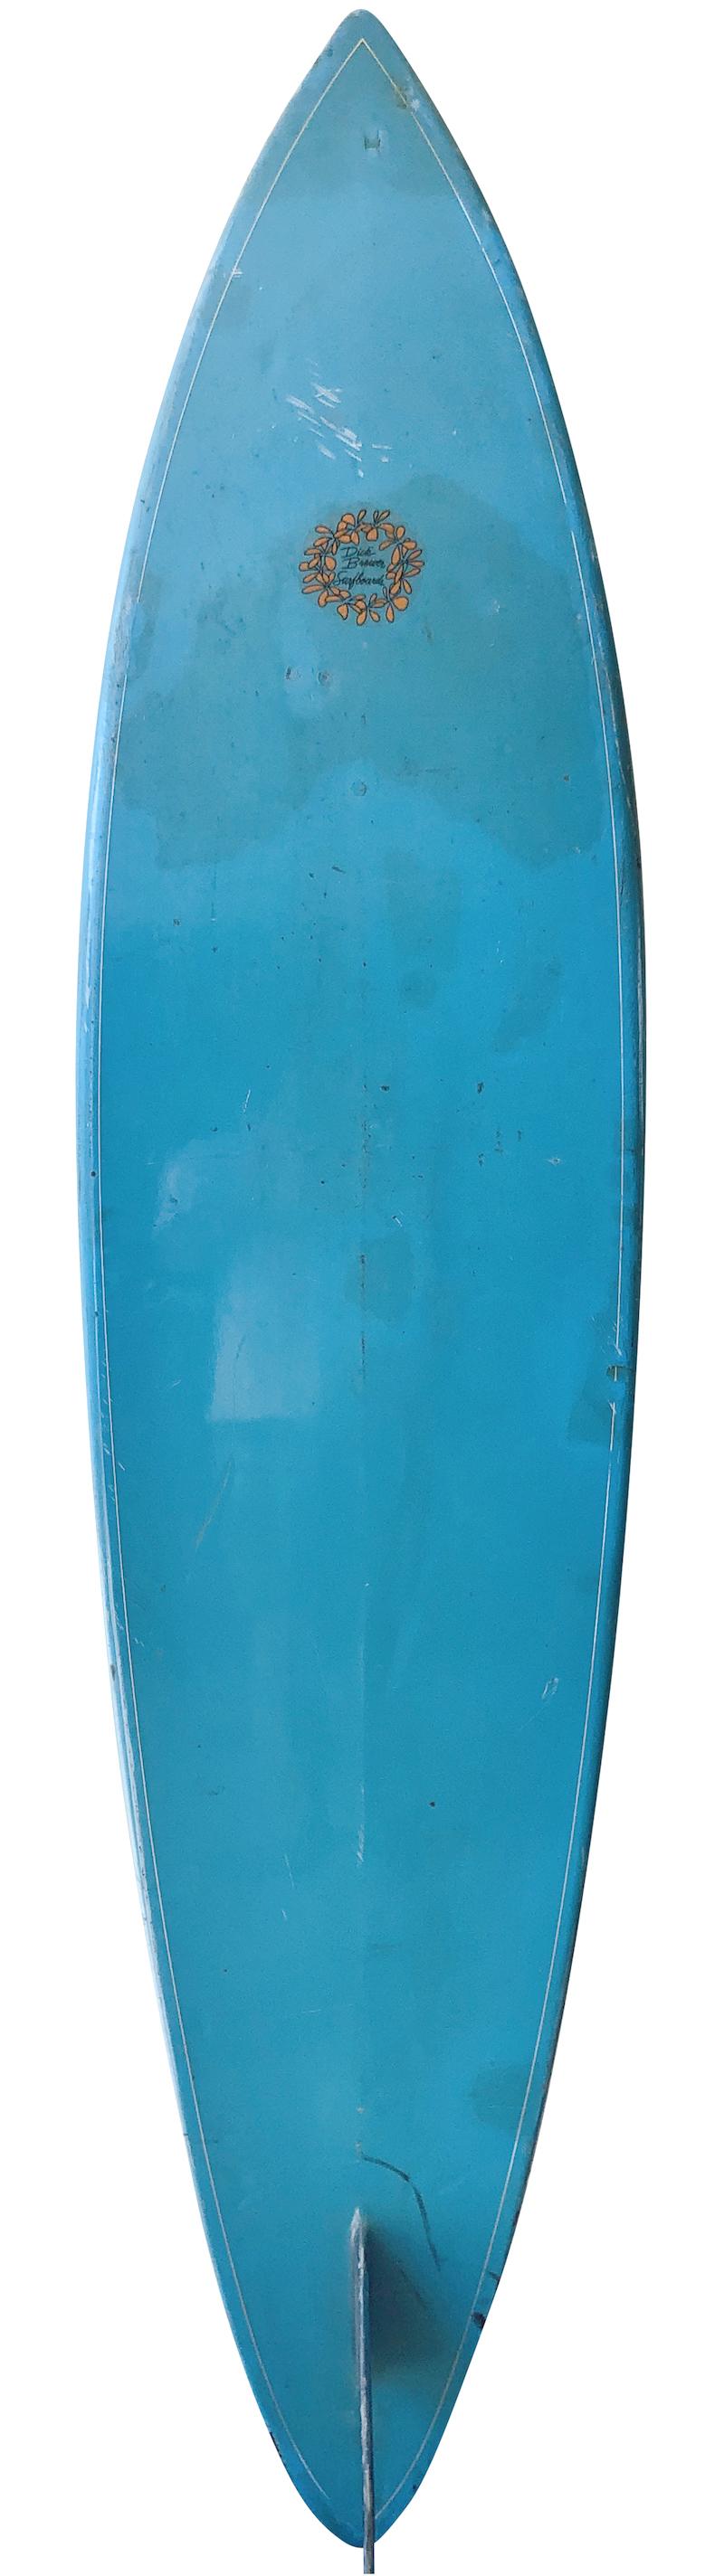 Mid to late 1970s Dick Brewer surfboards single fin shaped by Joe Blair. Features a rounded pintail with beautiful blue tint, double pin-line design, and glassed on single fin. This vintage surfboard remains in all original condition.

Dick Brewer